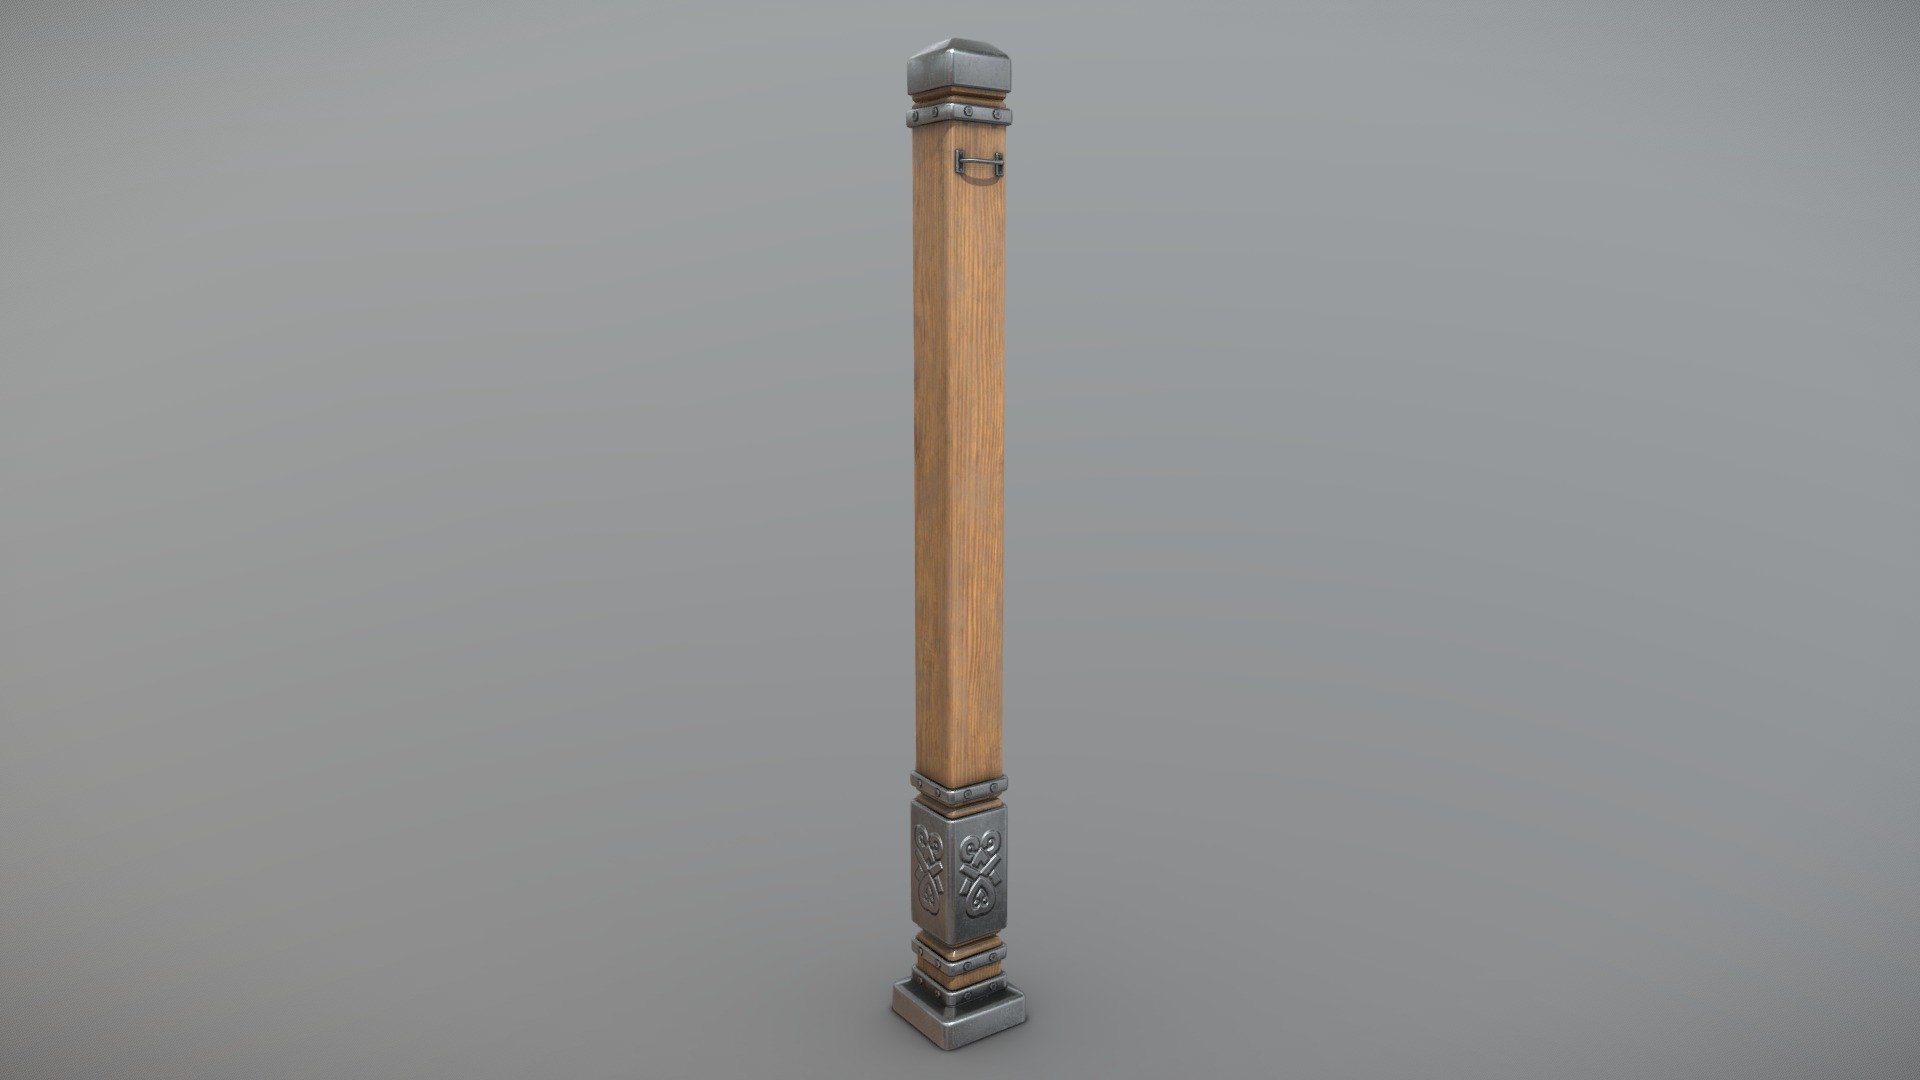 Suspension Post

I made this post in Blender 3D and textured it in Substance Painter. 

2x 2048x2048 slots - Suspension Post - 3D model by wlodarski3d 3d model